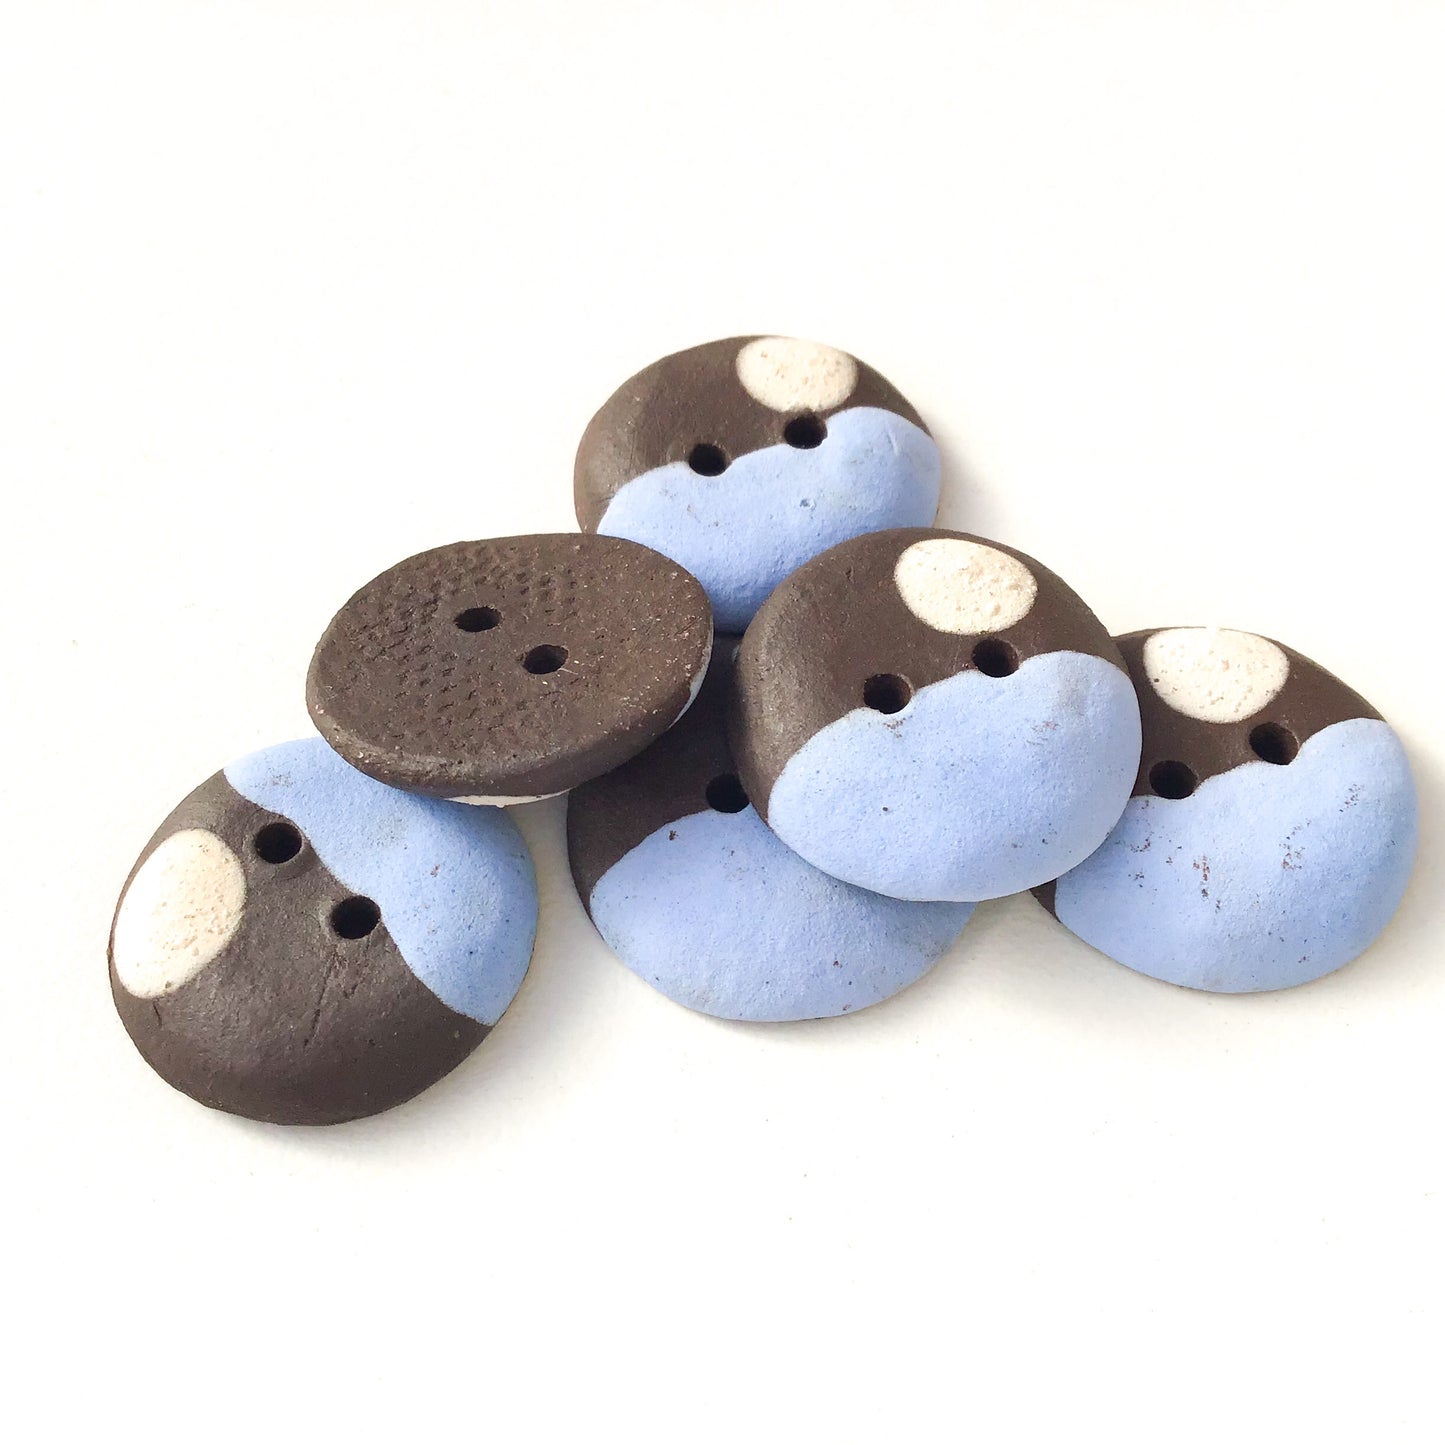 Sky Blue - Color Contrast Clay Buttons - Black Clay Ceramic Buttons - 3/4" - 6 Pack